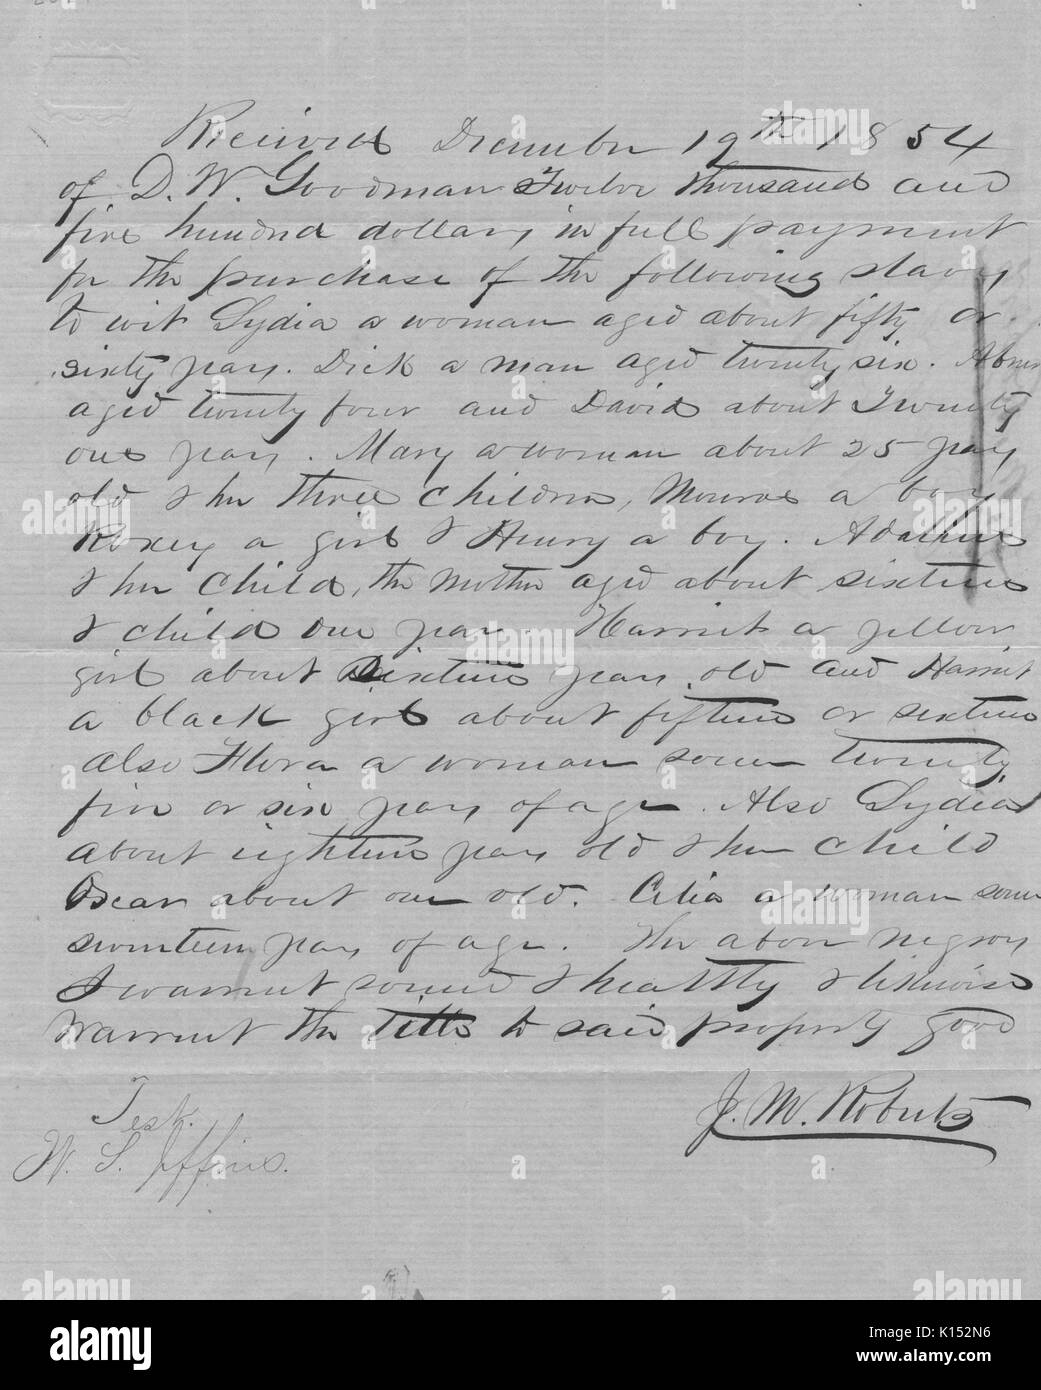 A hand written bill of sale for approximately twenty slaves for the sum of $12500, 1854. From the New York Public Library. Stock Photo